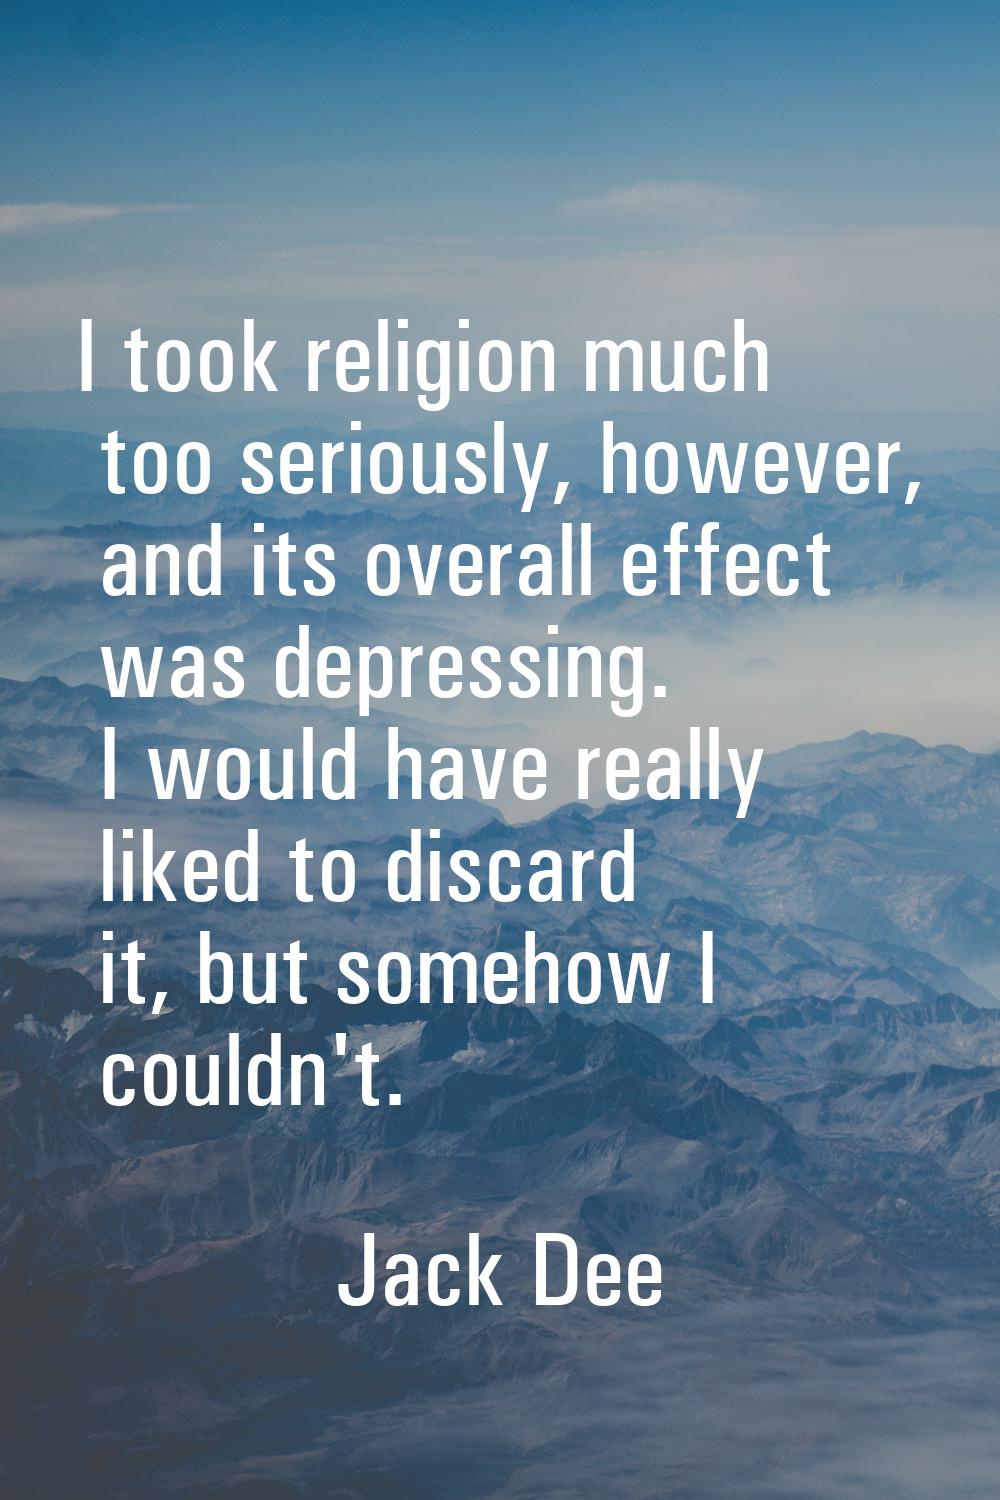 I took religion much too seriously, however, and its overall effect was depressing. I would have re